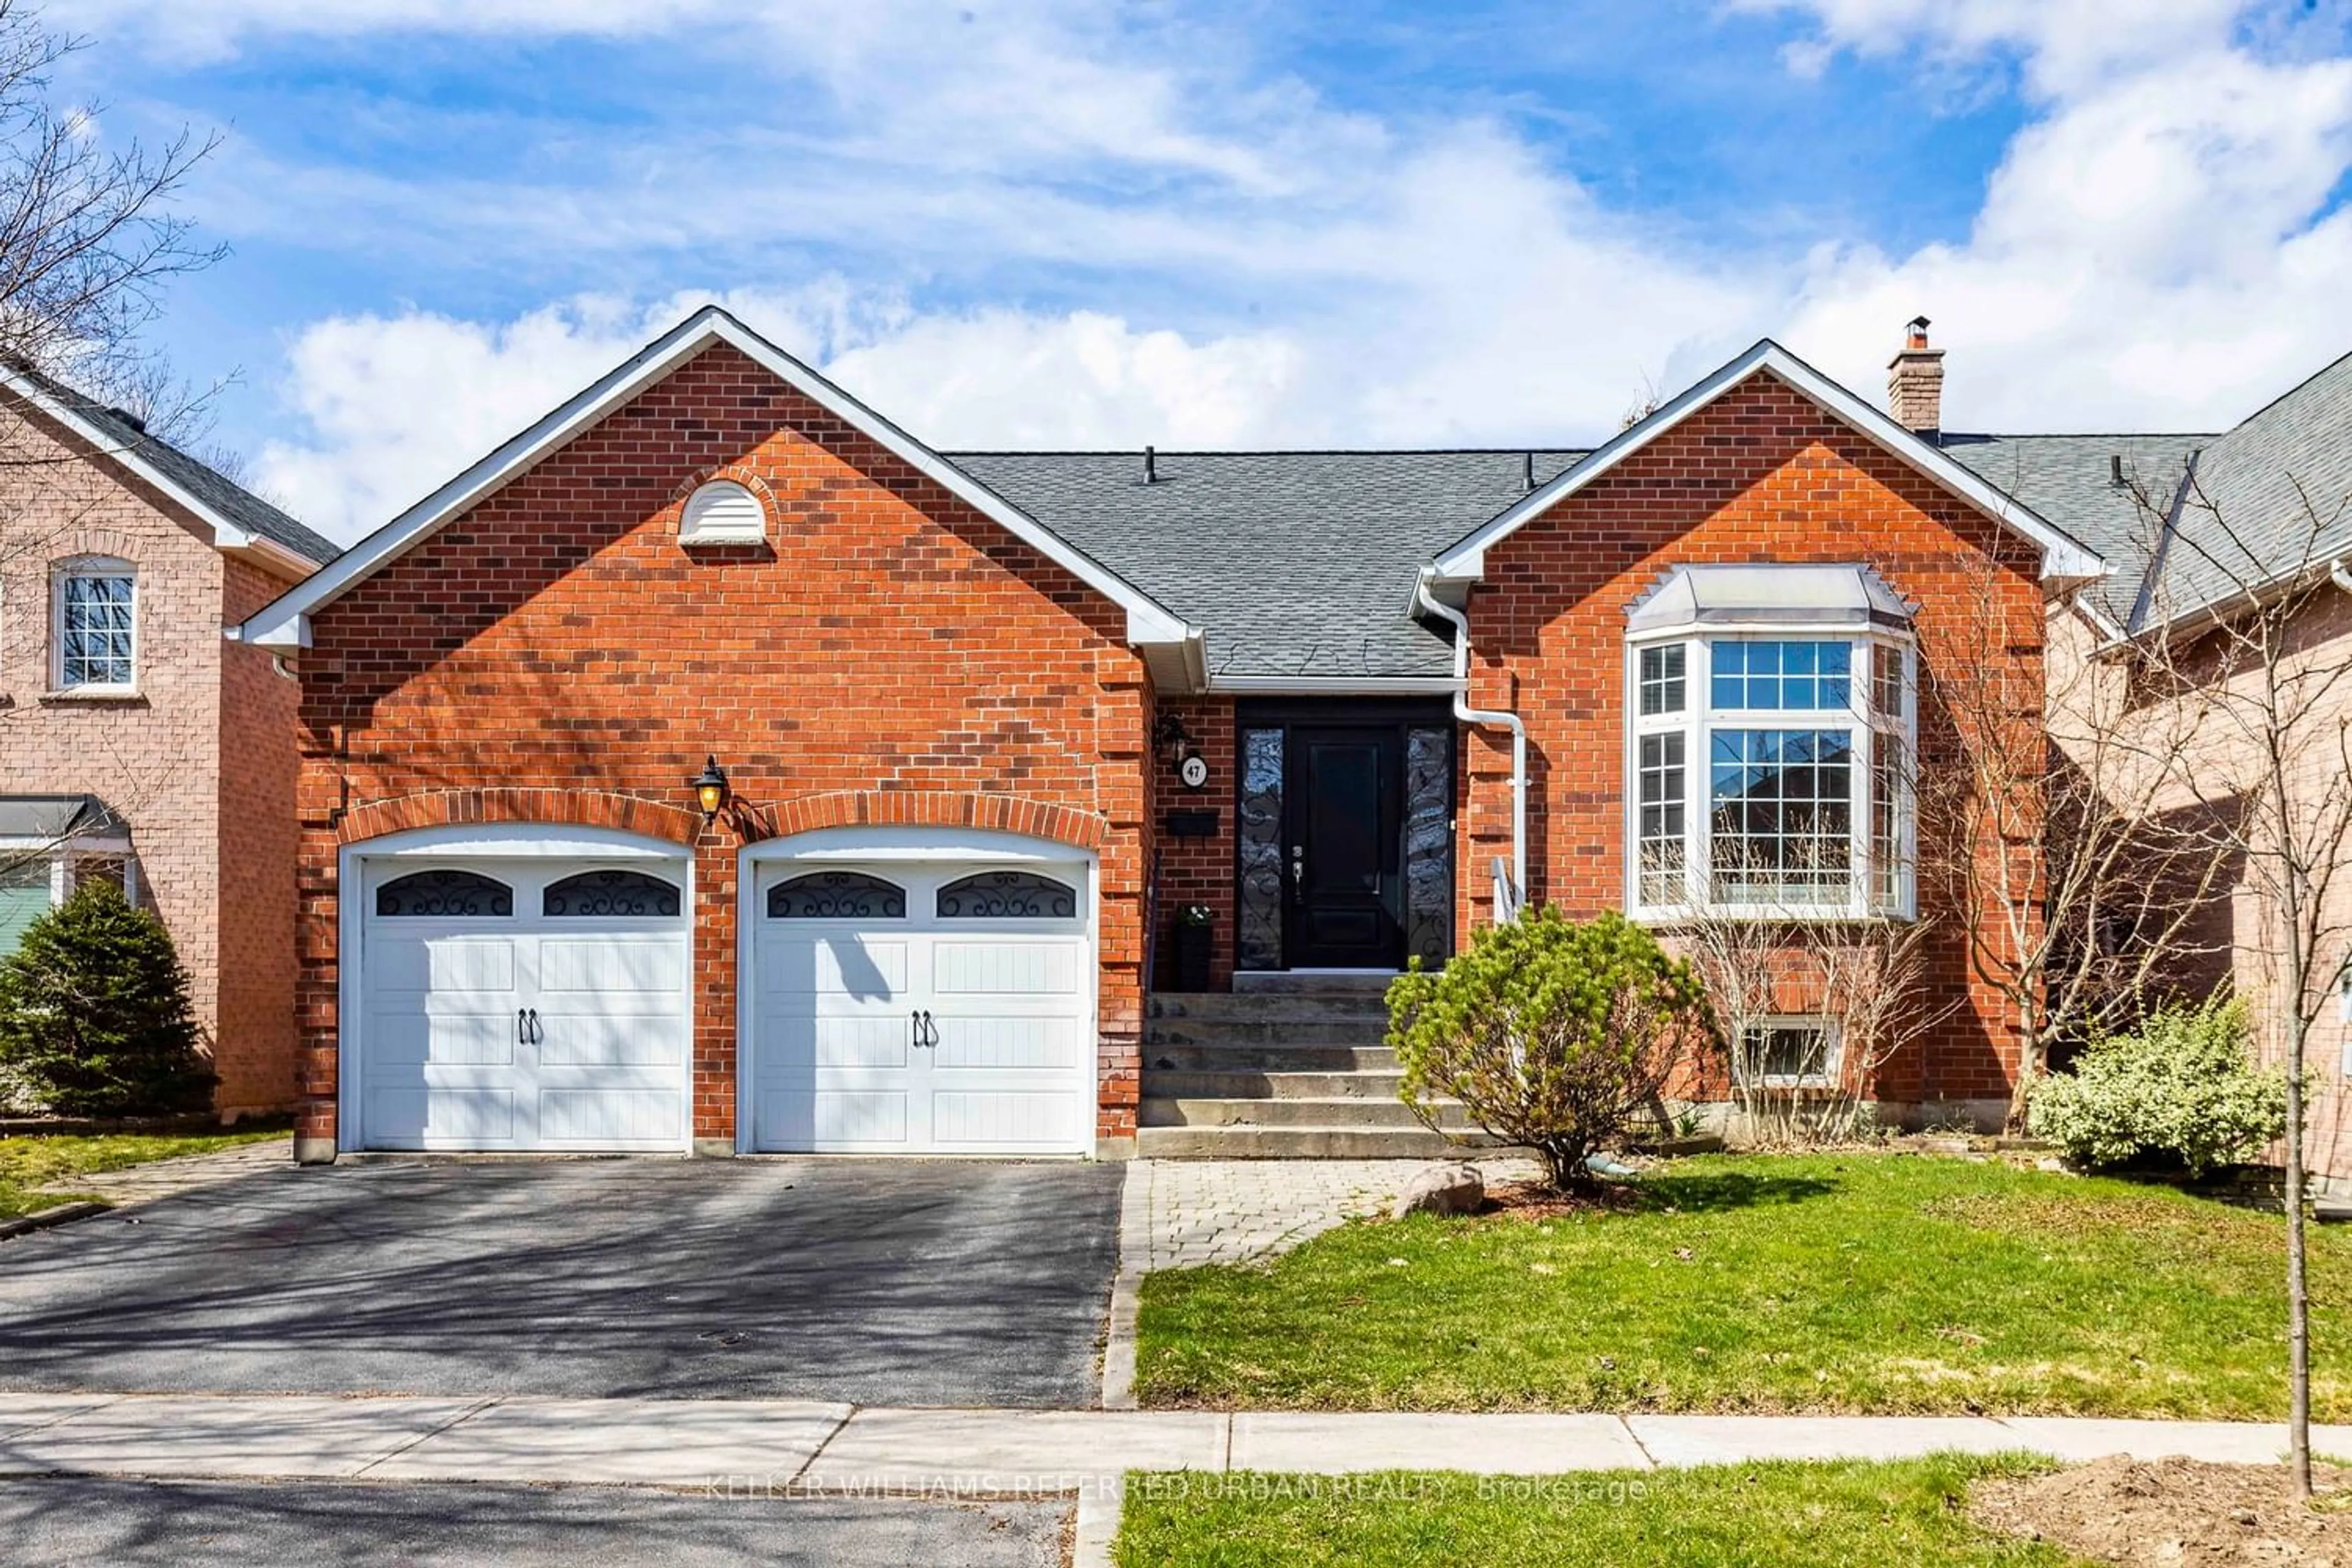 Home with brick exterior material for 47 Murdock Ave, Aurora Ontario L4G 5E3